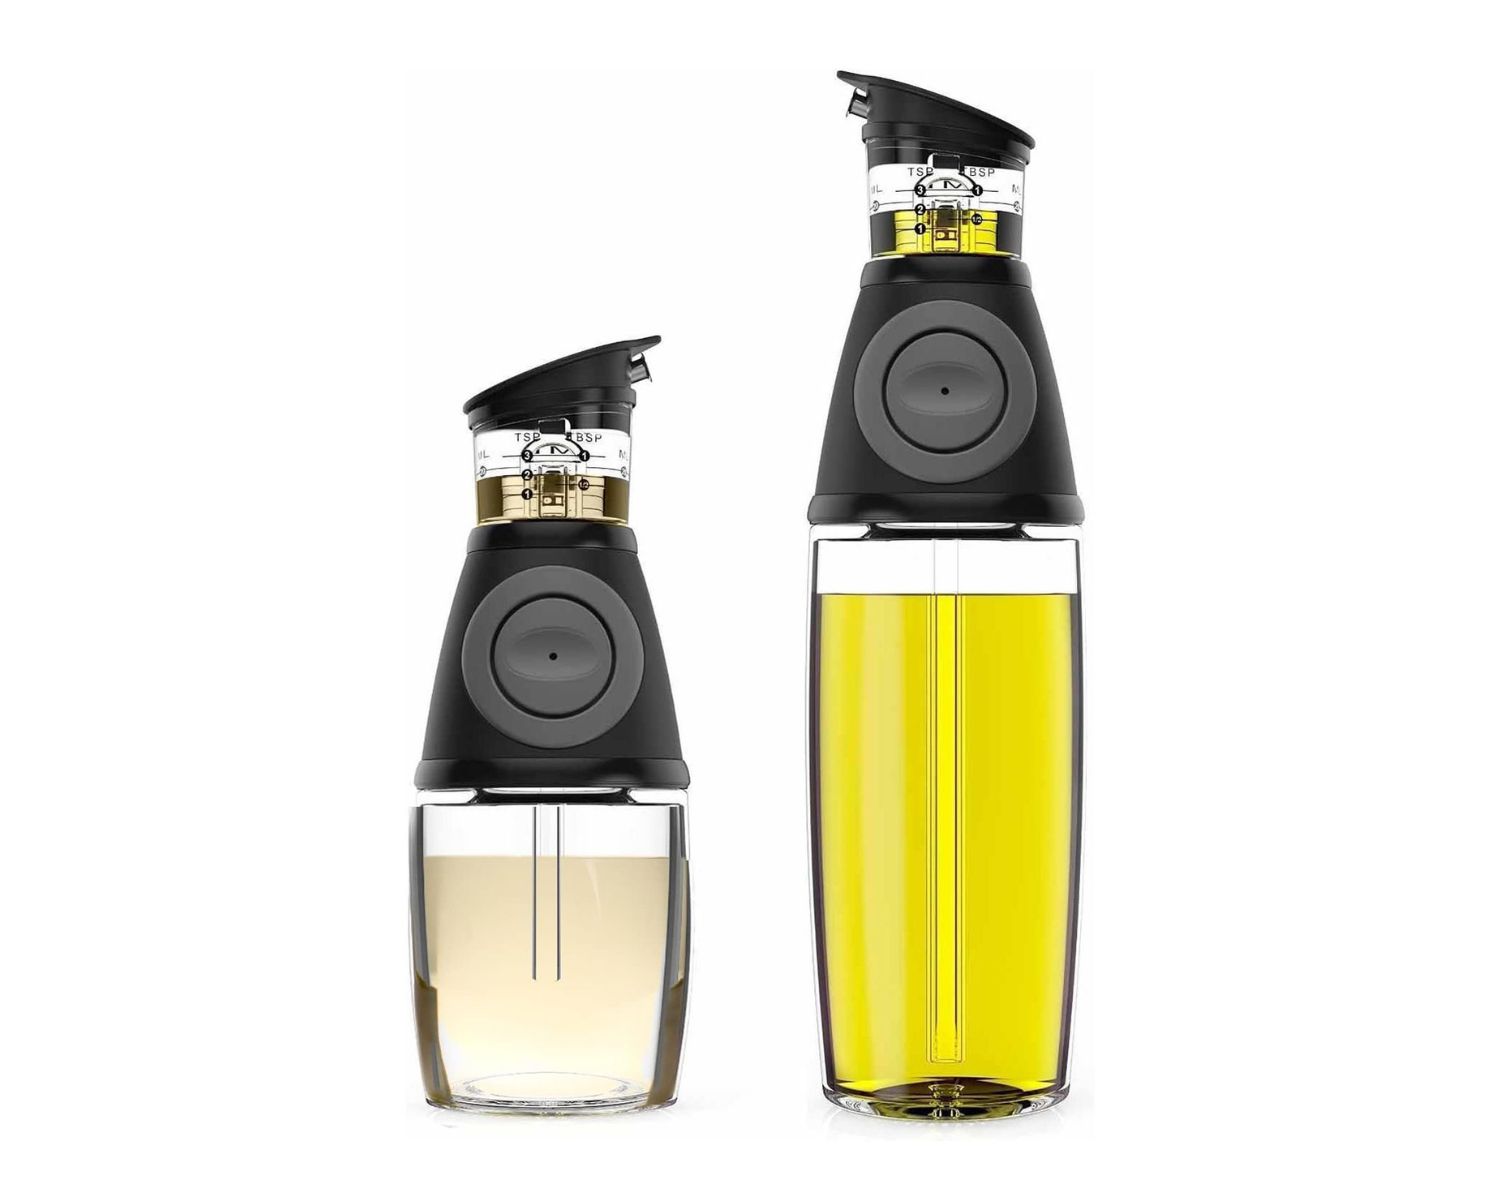 Olive Oil Dispenser Review: A Must-Have Kitchen Accessory